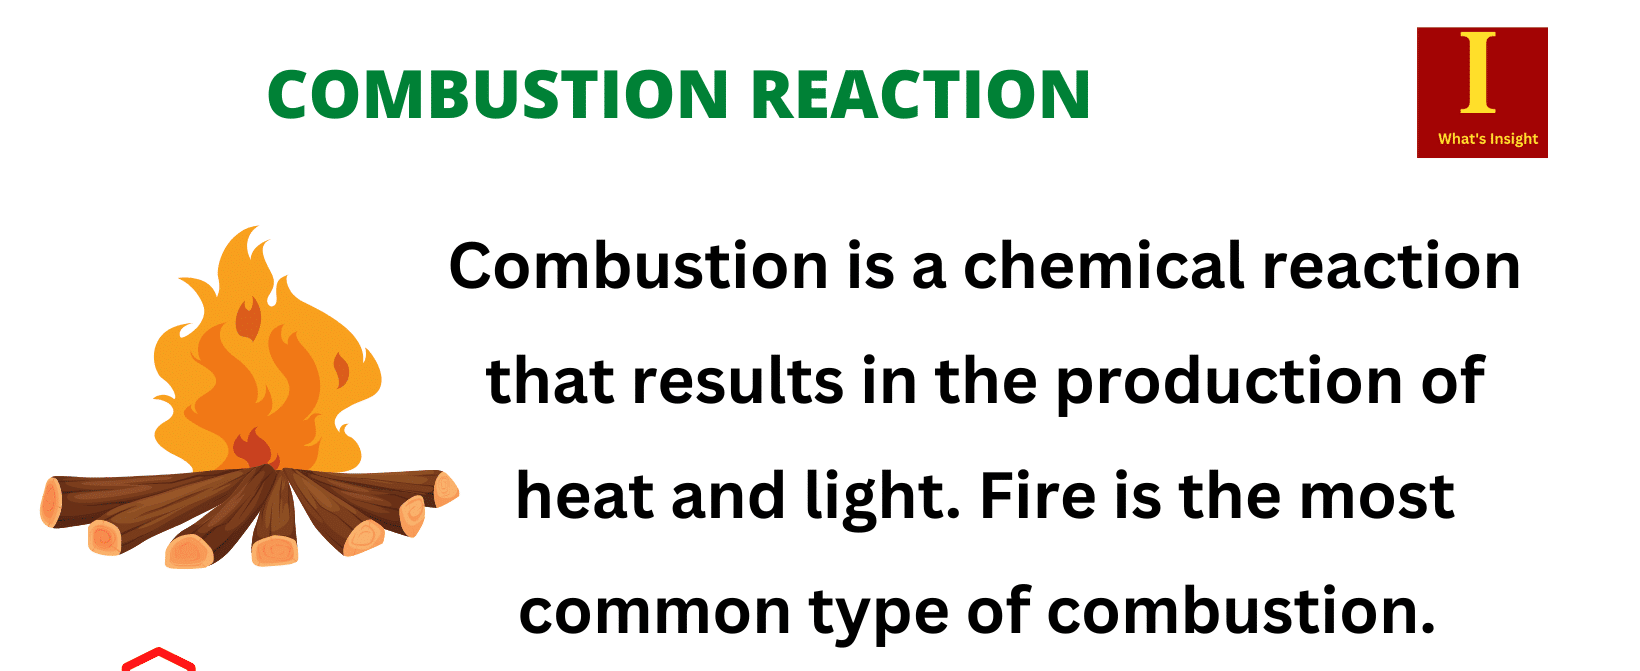 Combustion Reactions Introduction, Examples, & Facts What's Insight